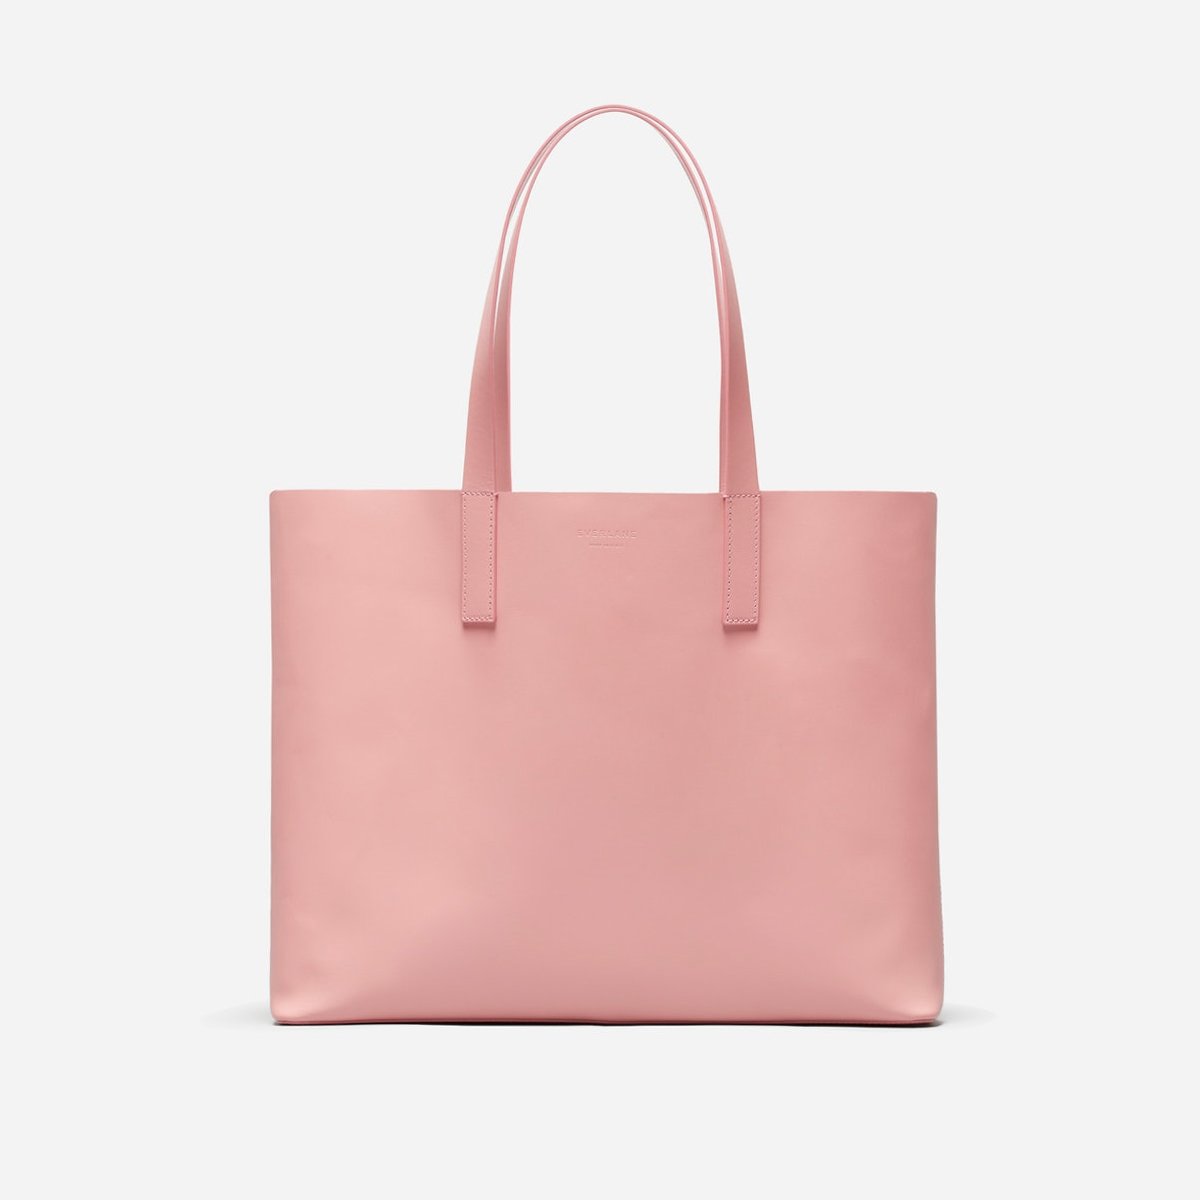 The Day Market Tote, Everlane, 6